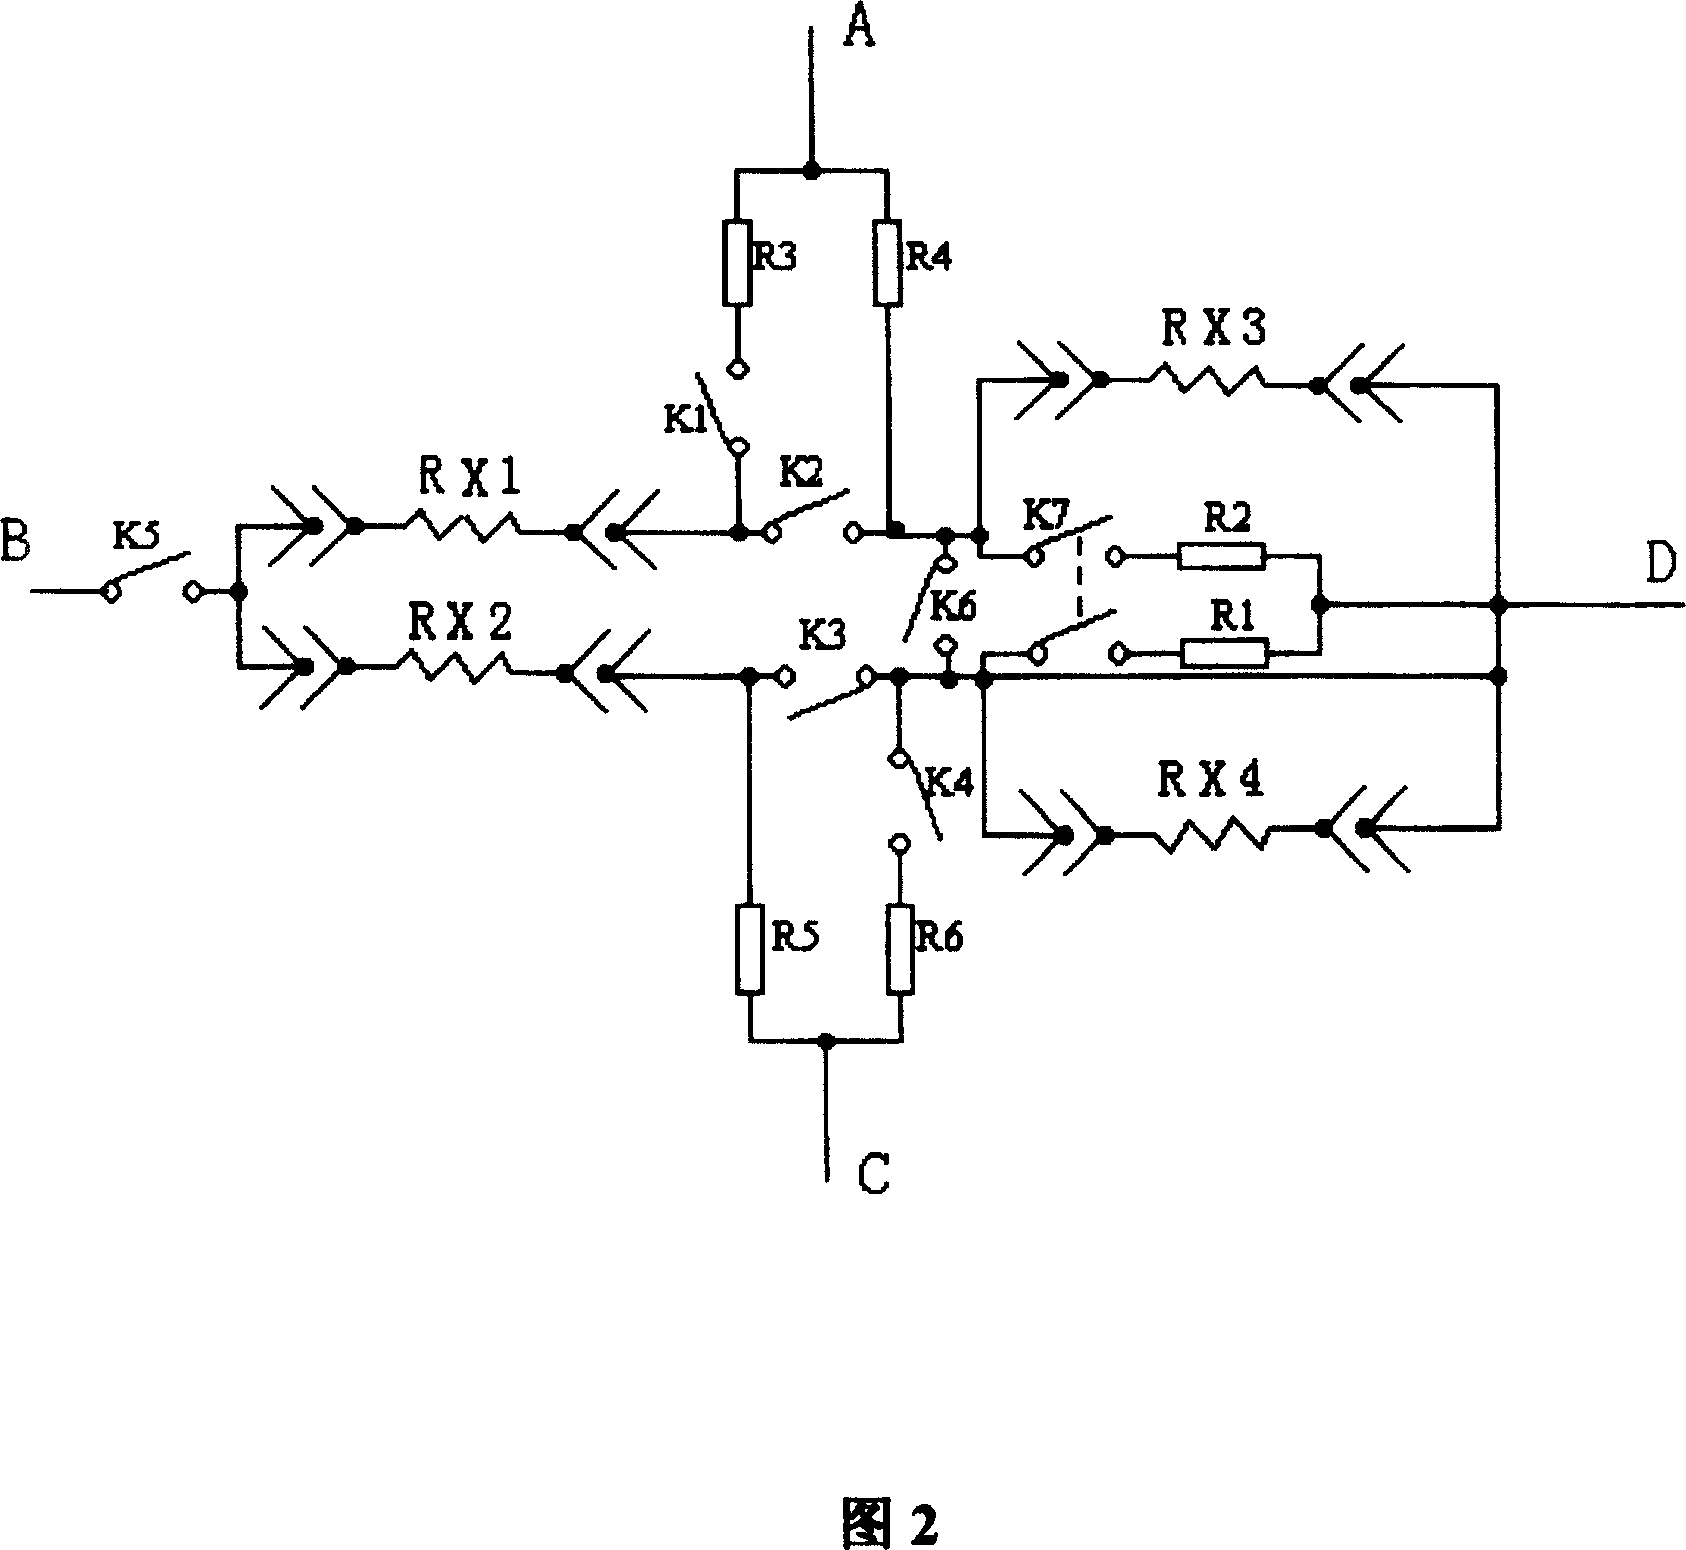 Signal switching apparatus of static multi-point strainmeter